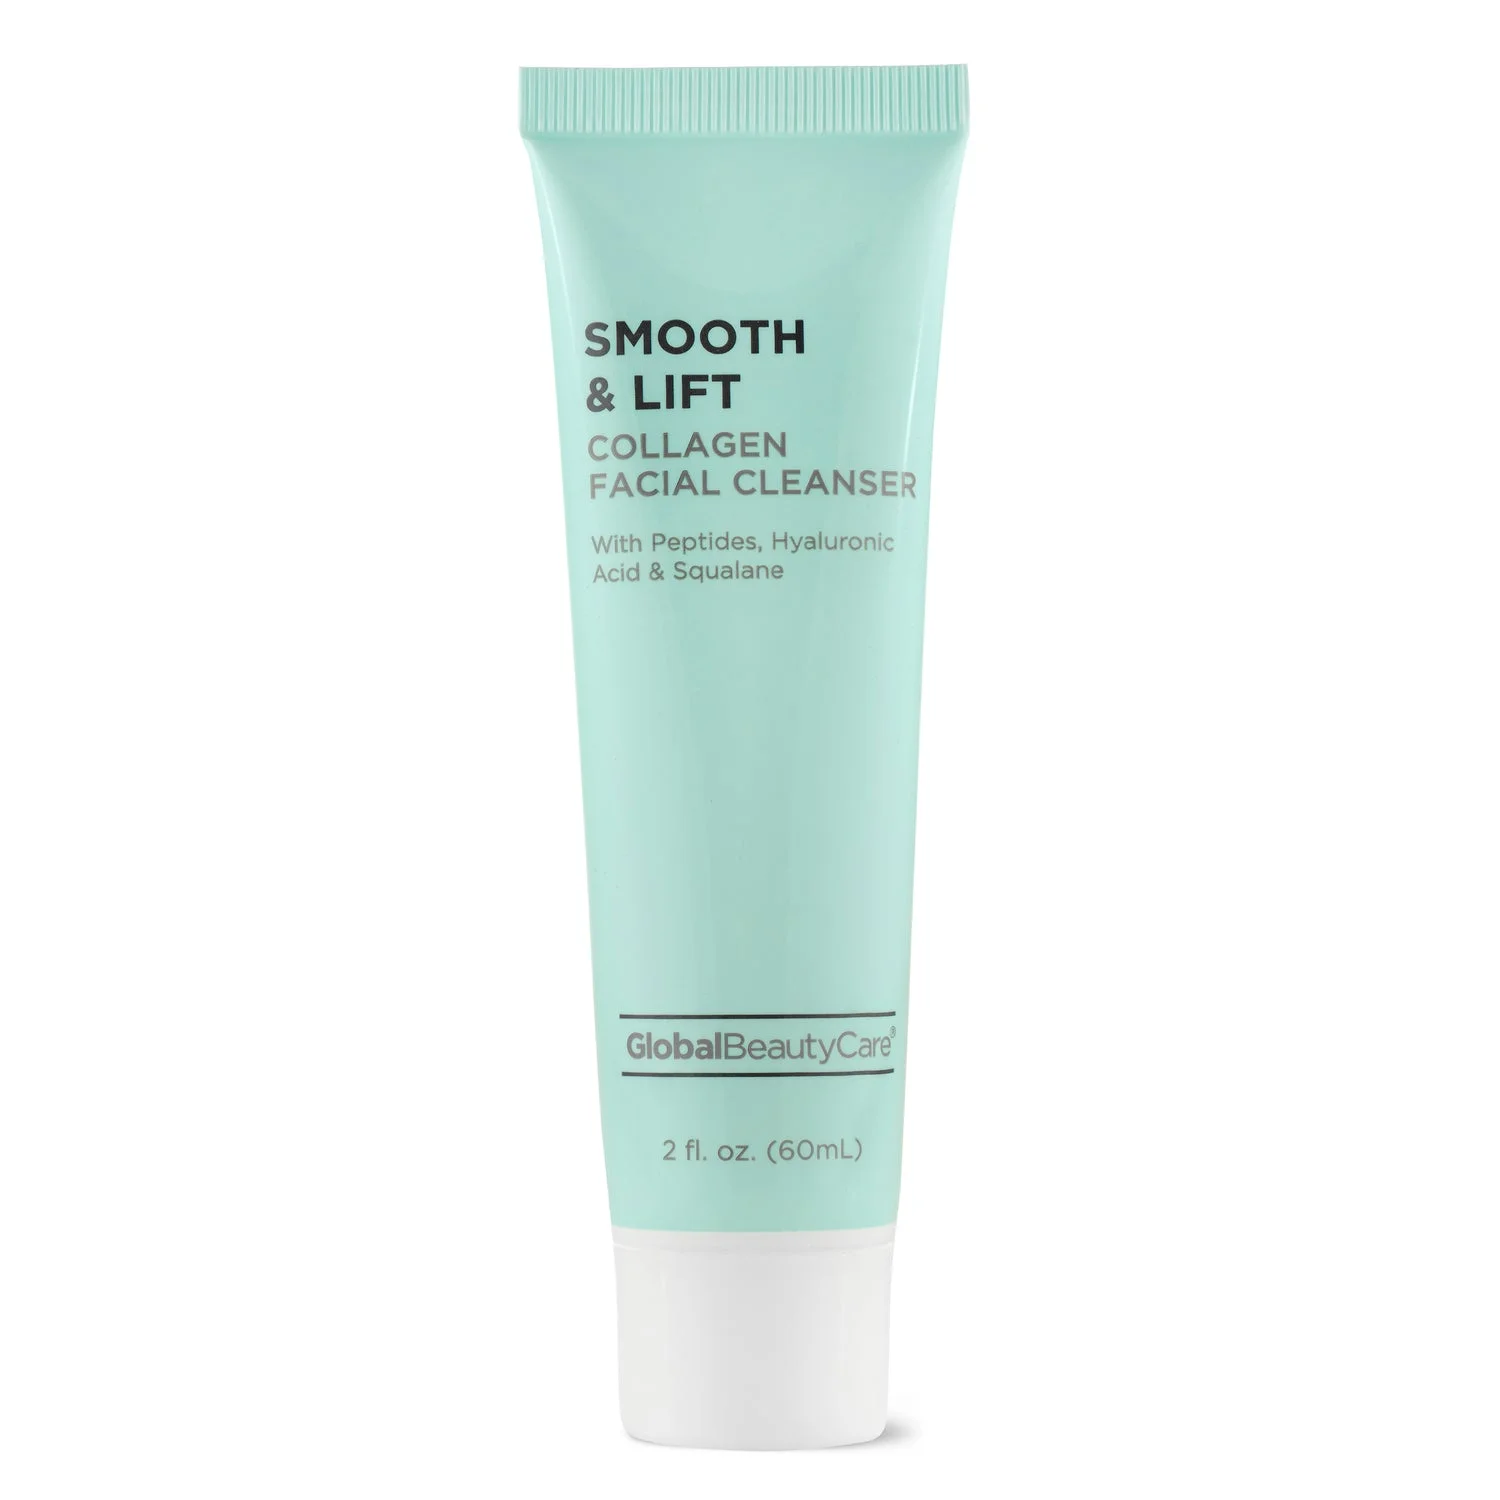 Global Beauty Care - Smooth & Lift Collagen Facial Cleanser 2 fl oz / 60 mL 